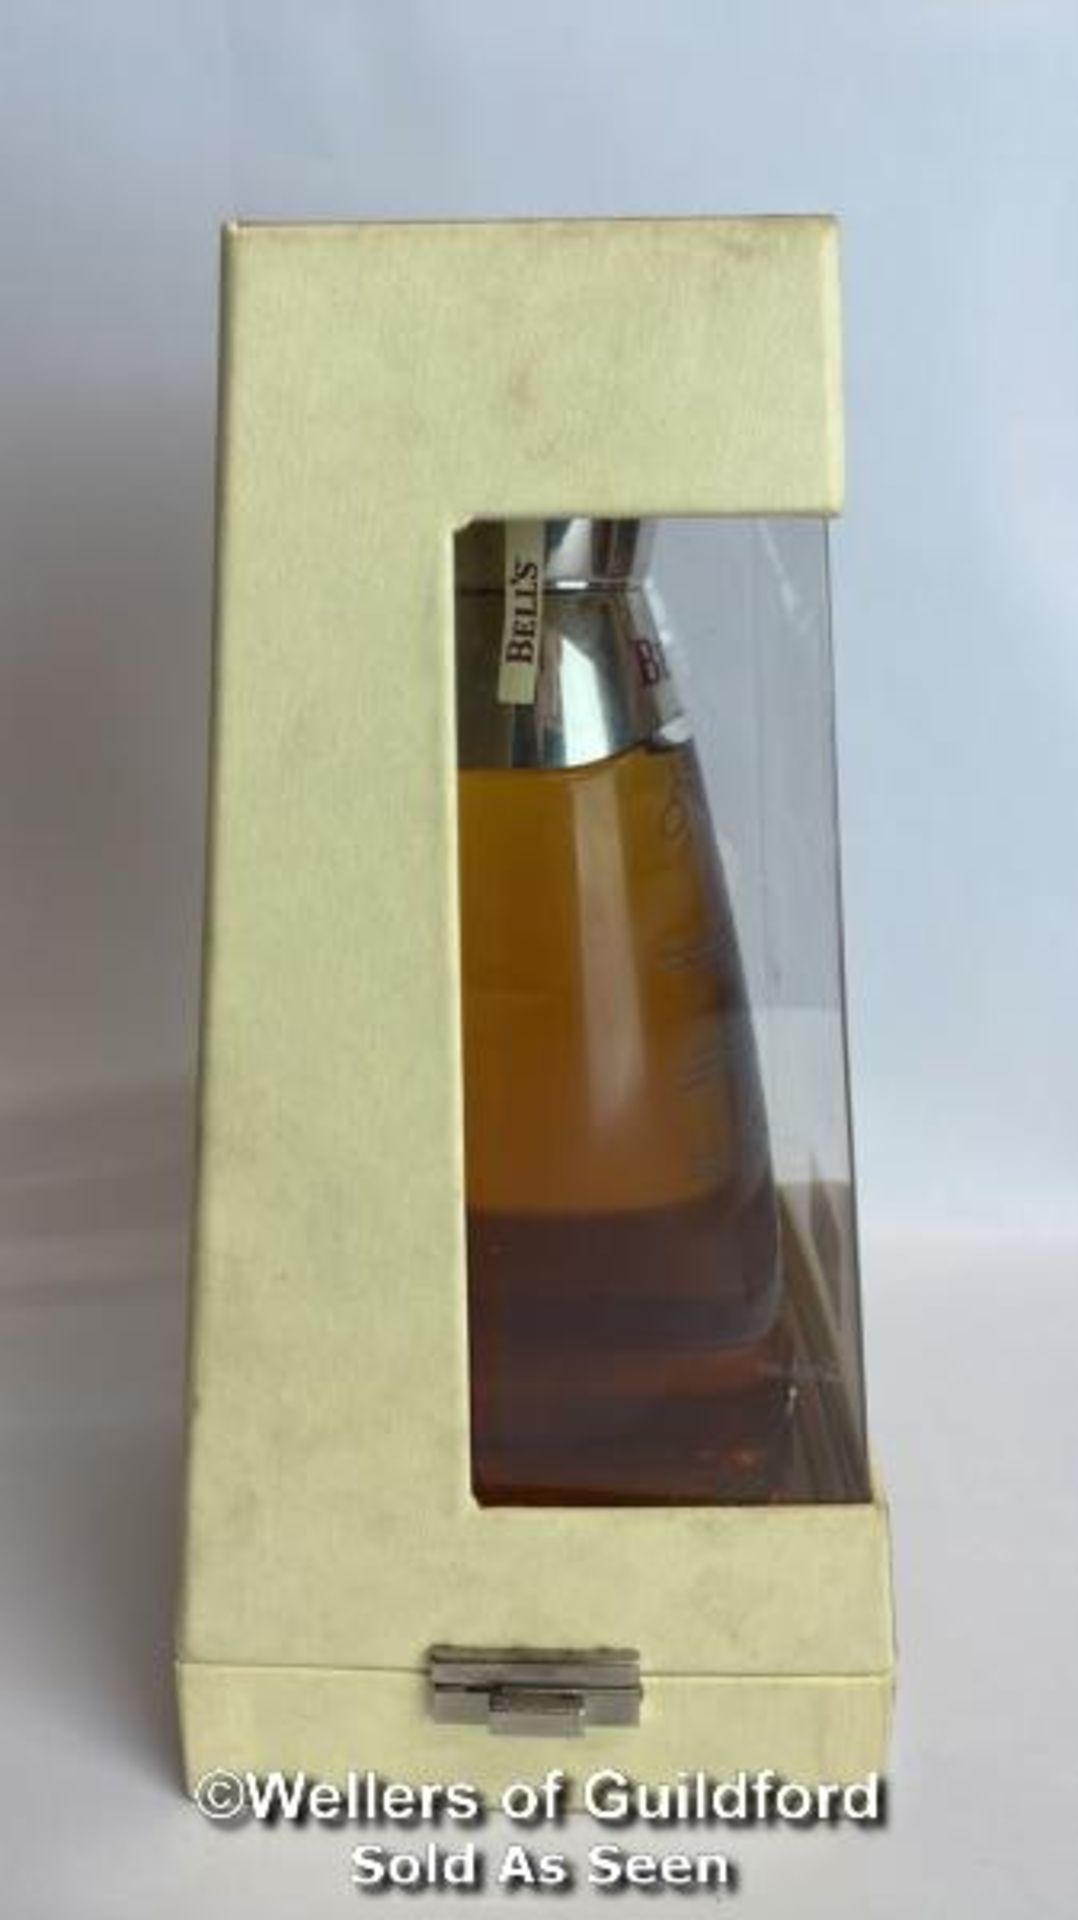 Bell's Extra Special 2000 Millenium Water of Life Whisky, Aged 8 Years, 70cl, 40% vol, In original - Image 10 of 10